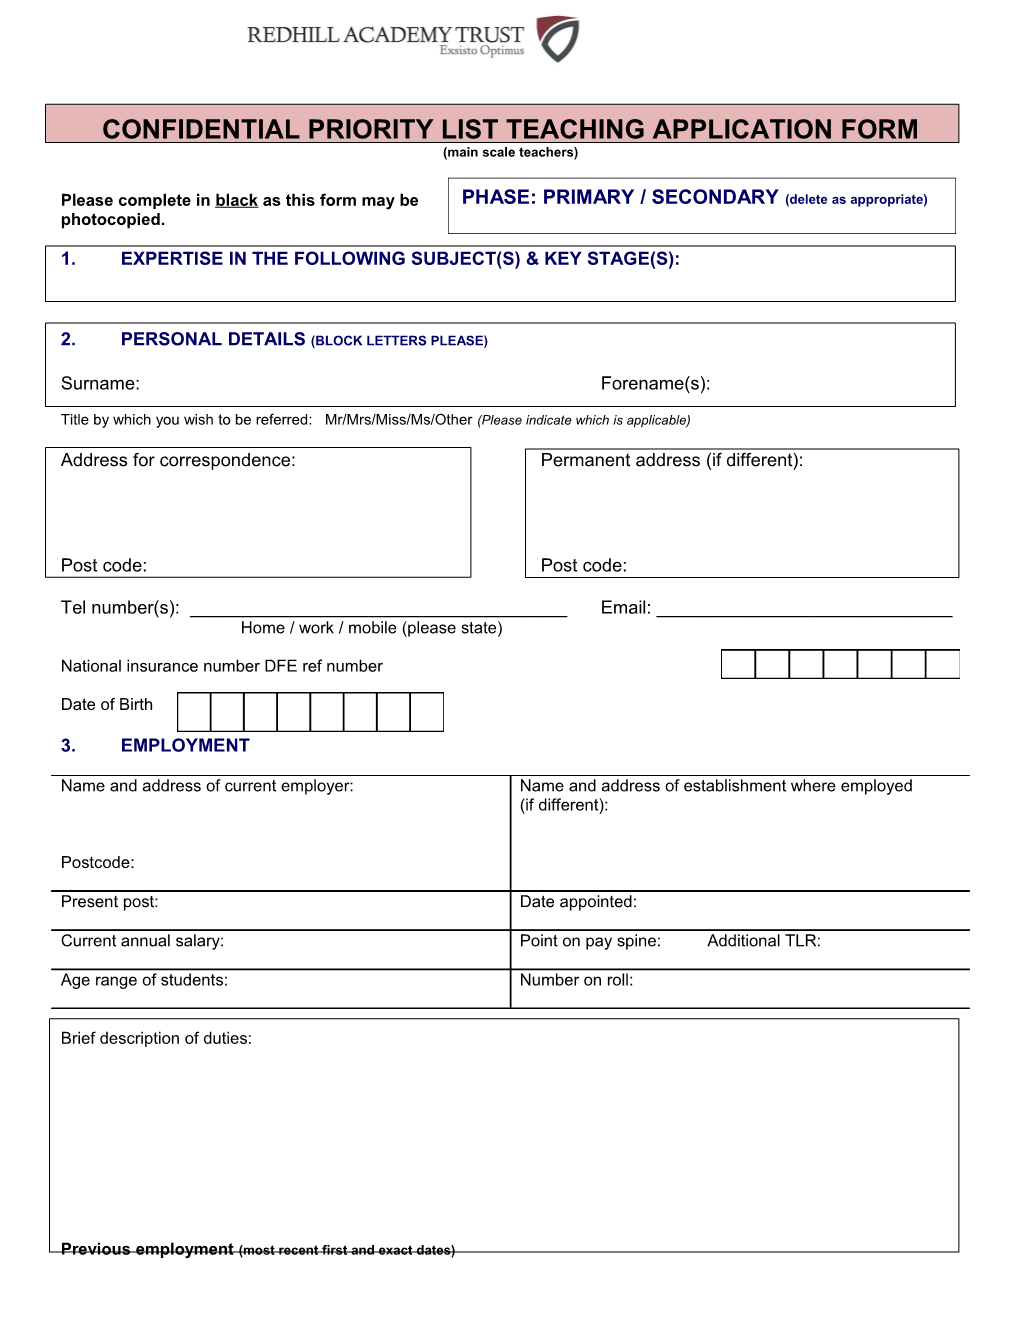 Confidential Priority List Teaching Application Form